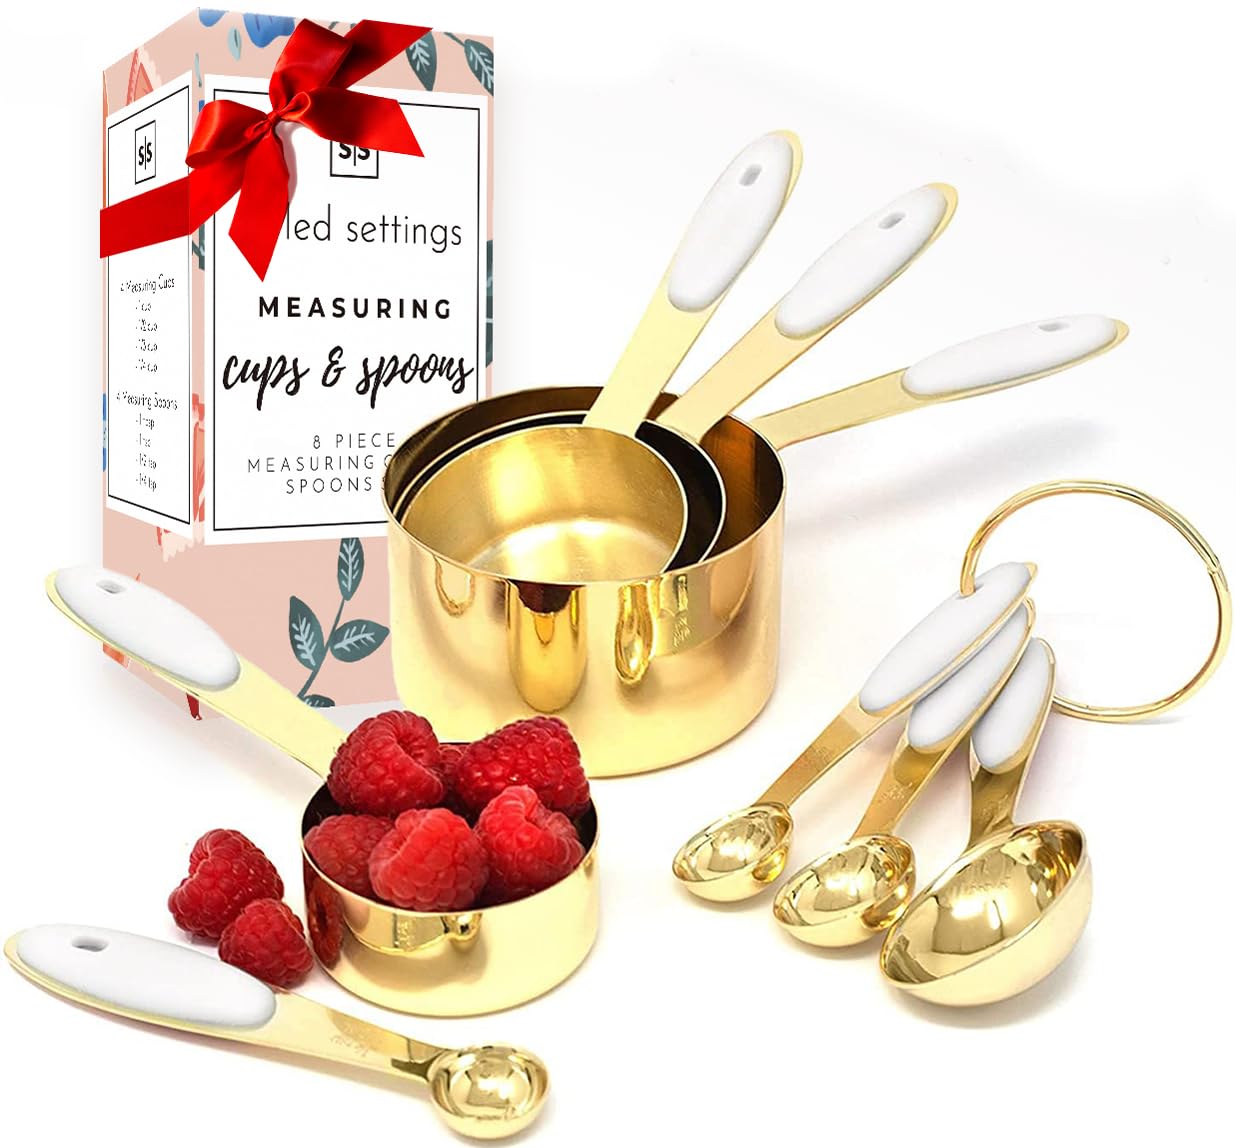 Styled Settings White and Gold Measuring Cups and Spoons Set - Cute Measuring Cups - 8PC Gold Stainless Steel Measuring Cups and Gold Measuring 